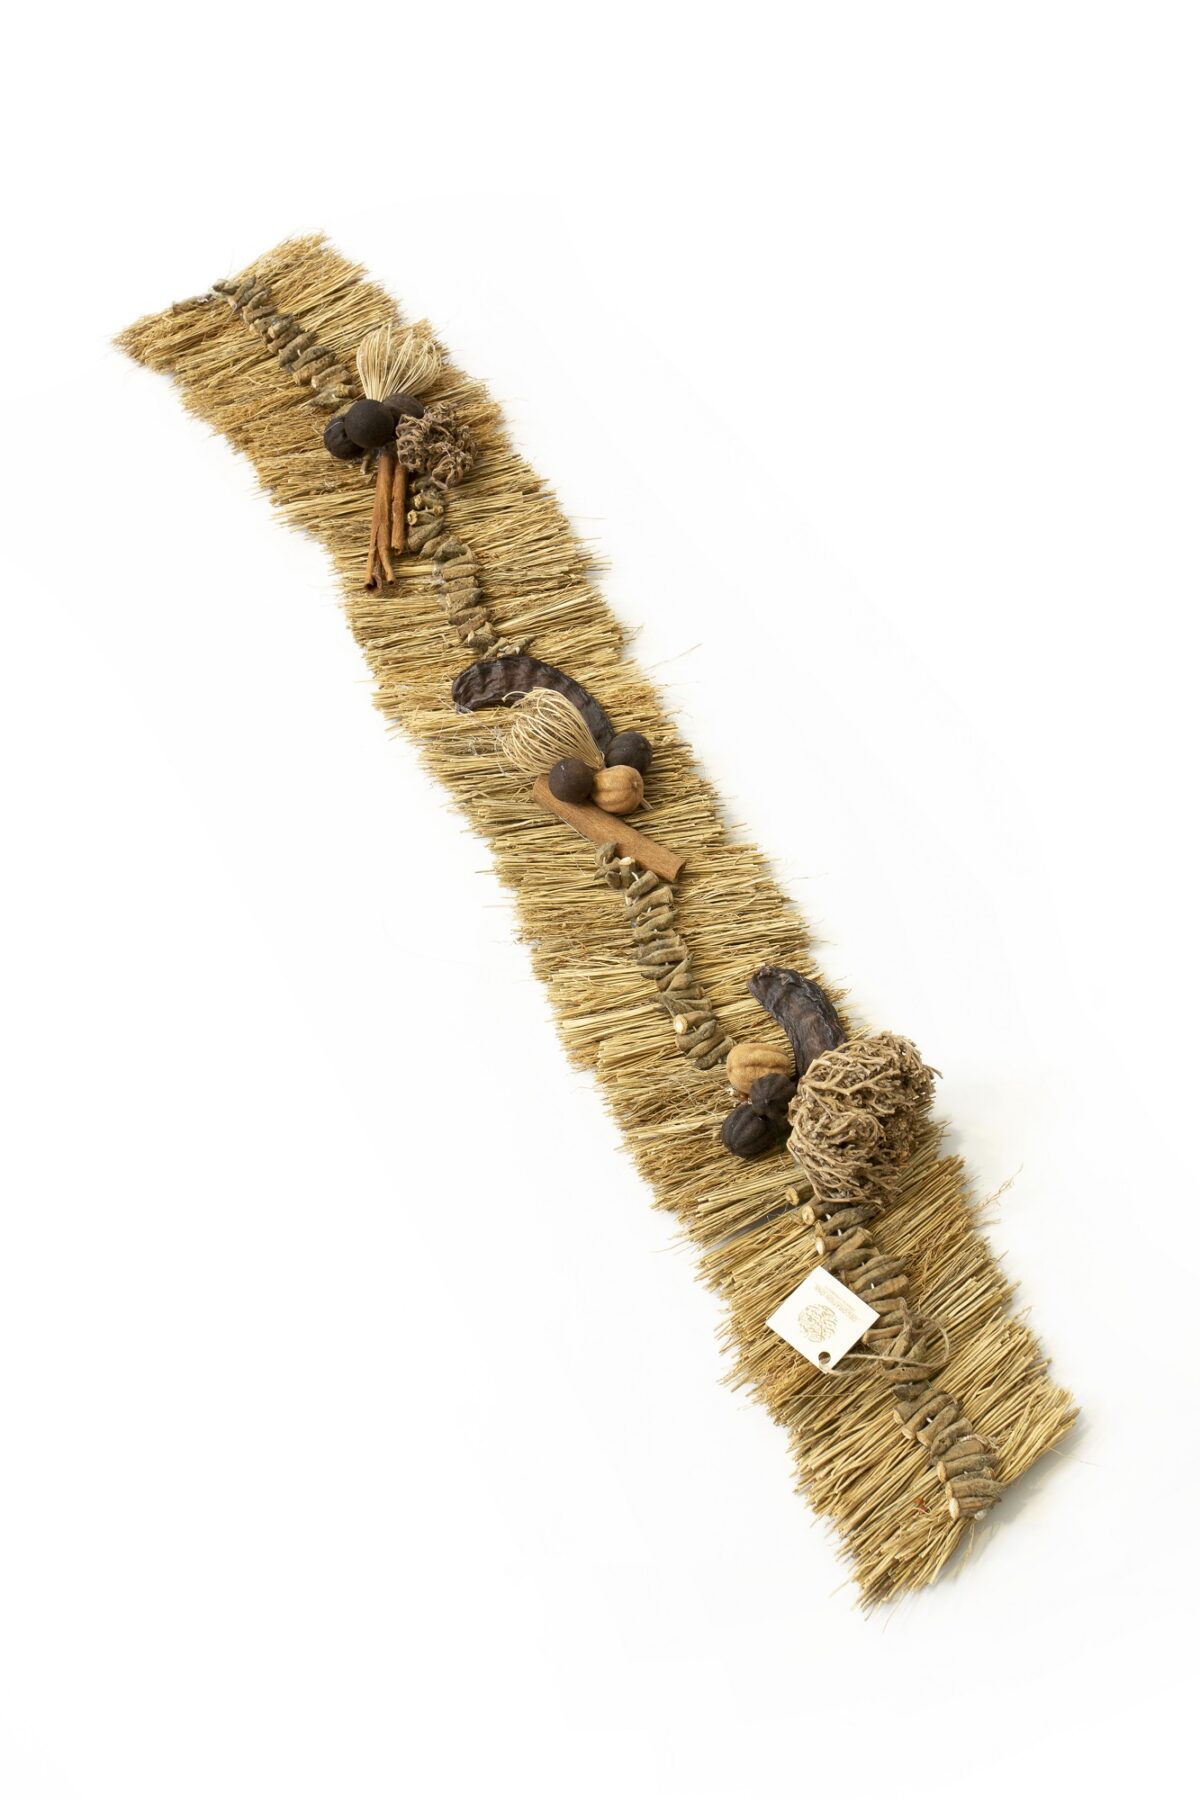 alt="straw runner with natural dried plants"